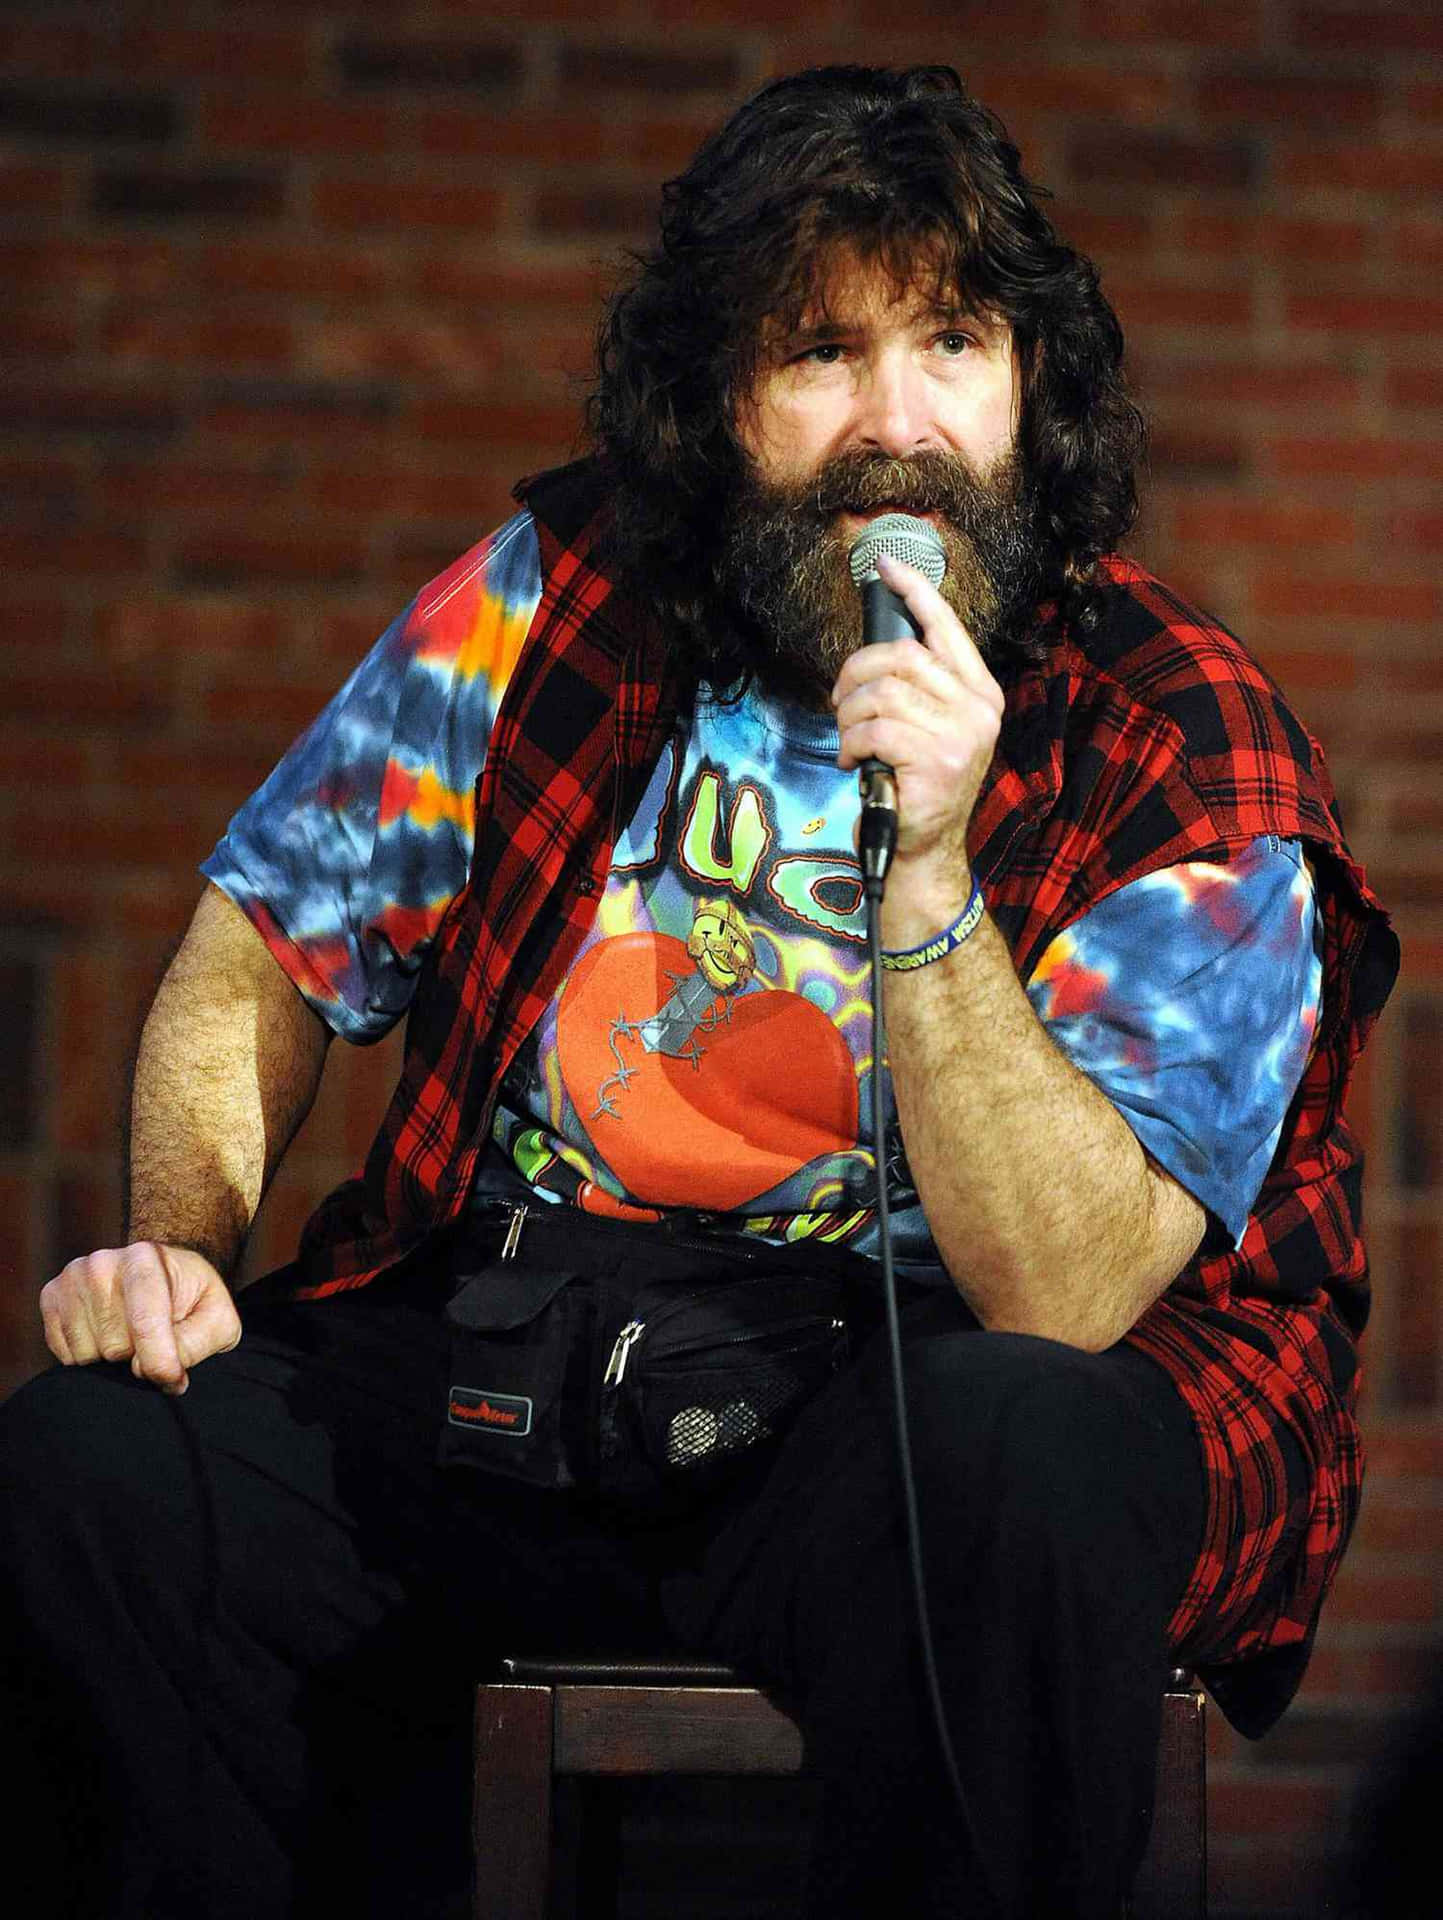 Legendary WWE hall of famer Mick Foley delivering engaging comedy chat. Wallpaper